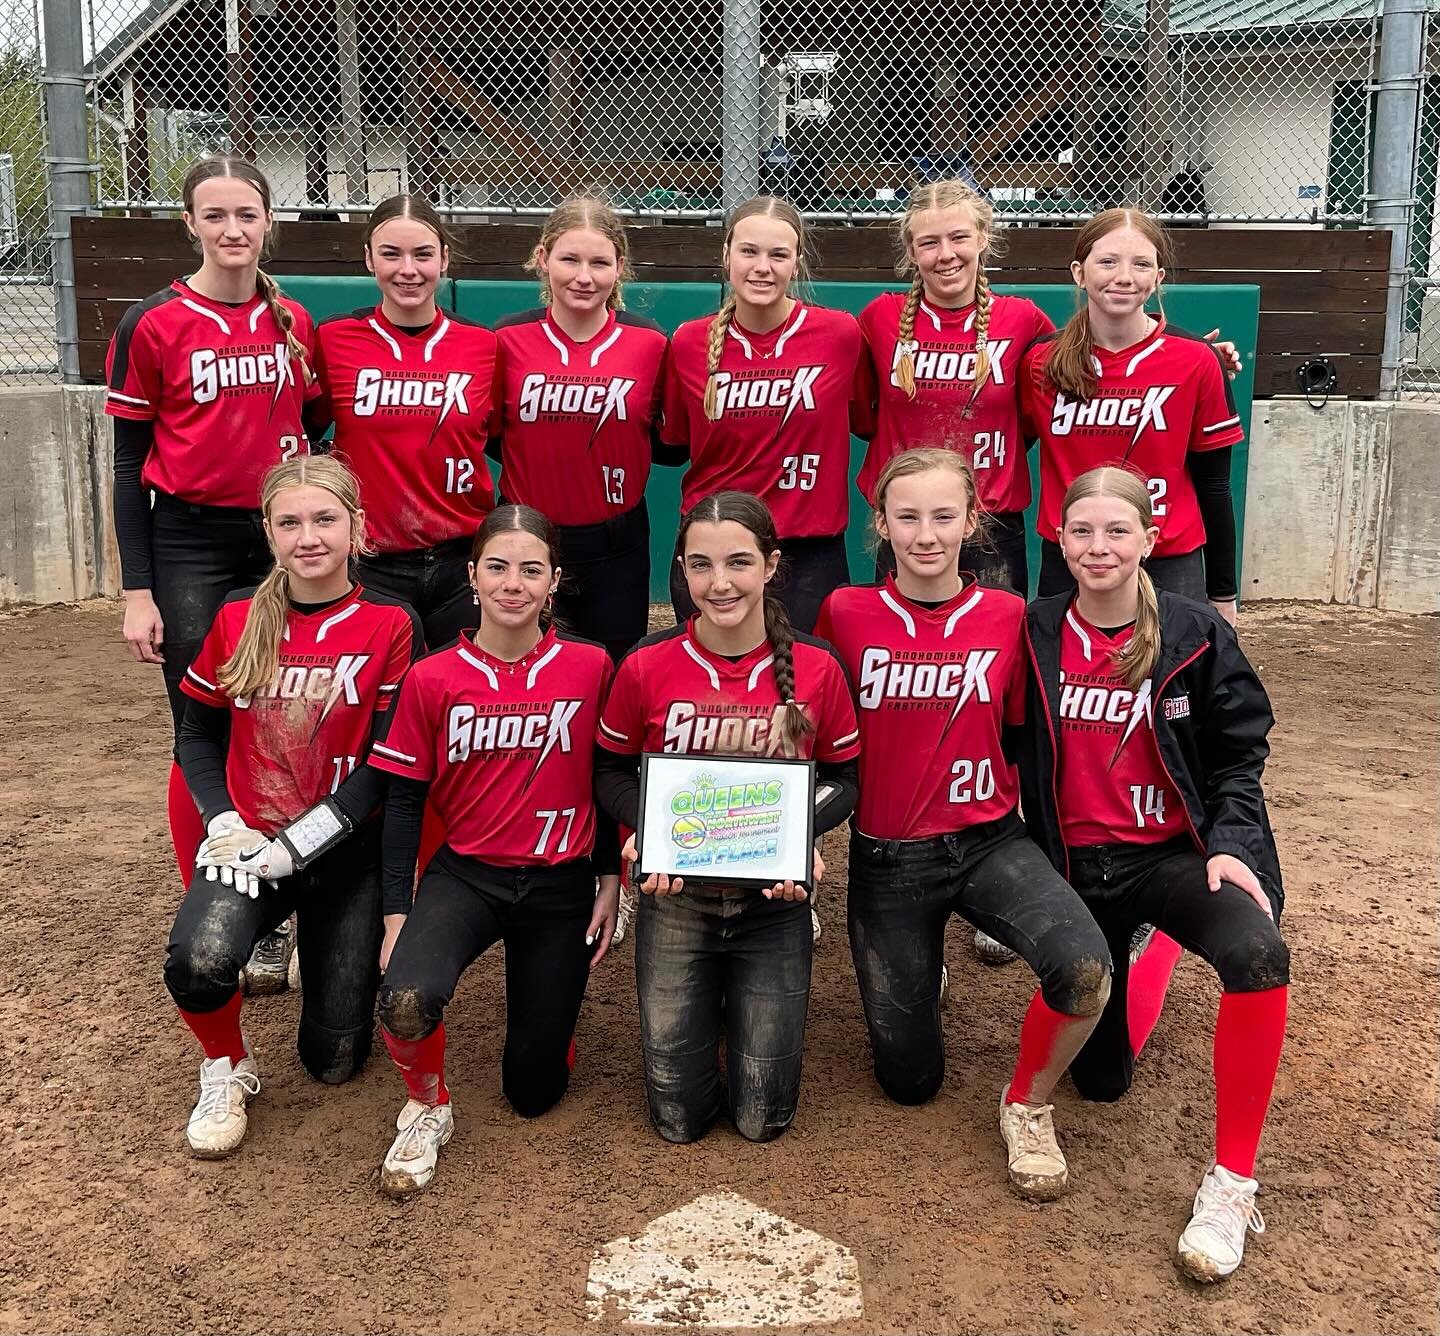 Another fantastic weekend of Shock softball! Even with having to battle the PNW wind and rain, the girls came out on fire and ended up placing 2nd in this weekend&rsquo;s 16U/18U tournament! Another 💣 by McKenna (3rd of the tournament), and a 💣 by 